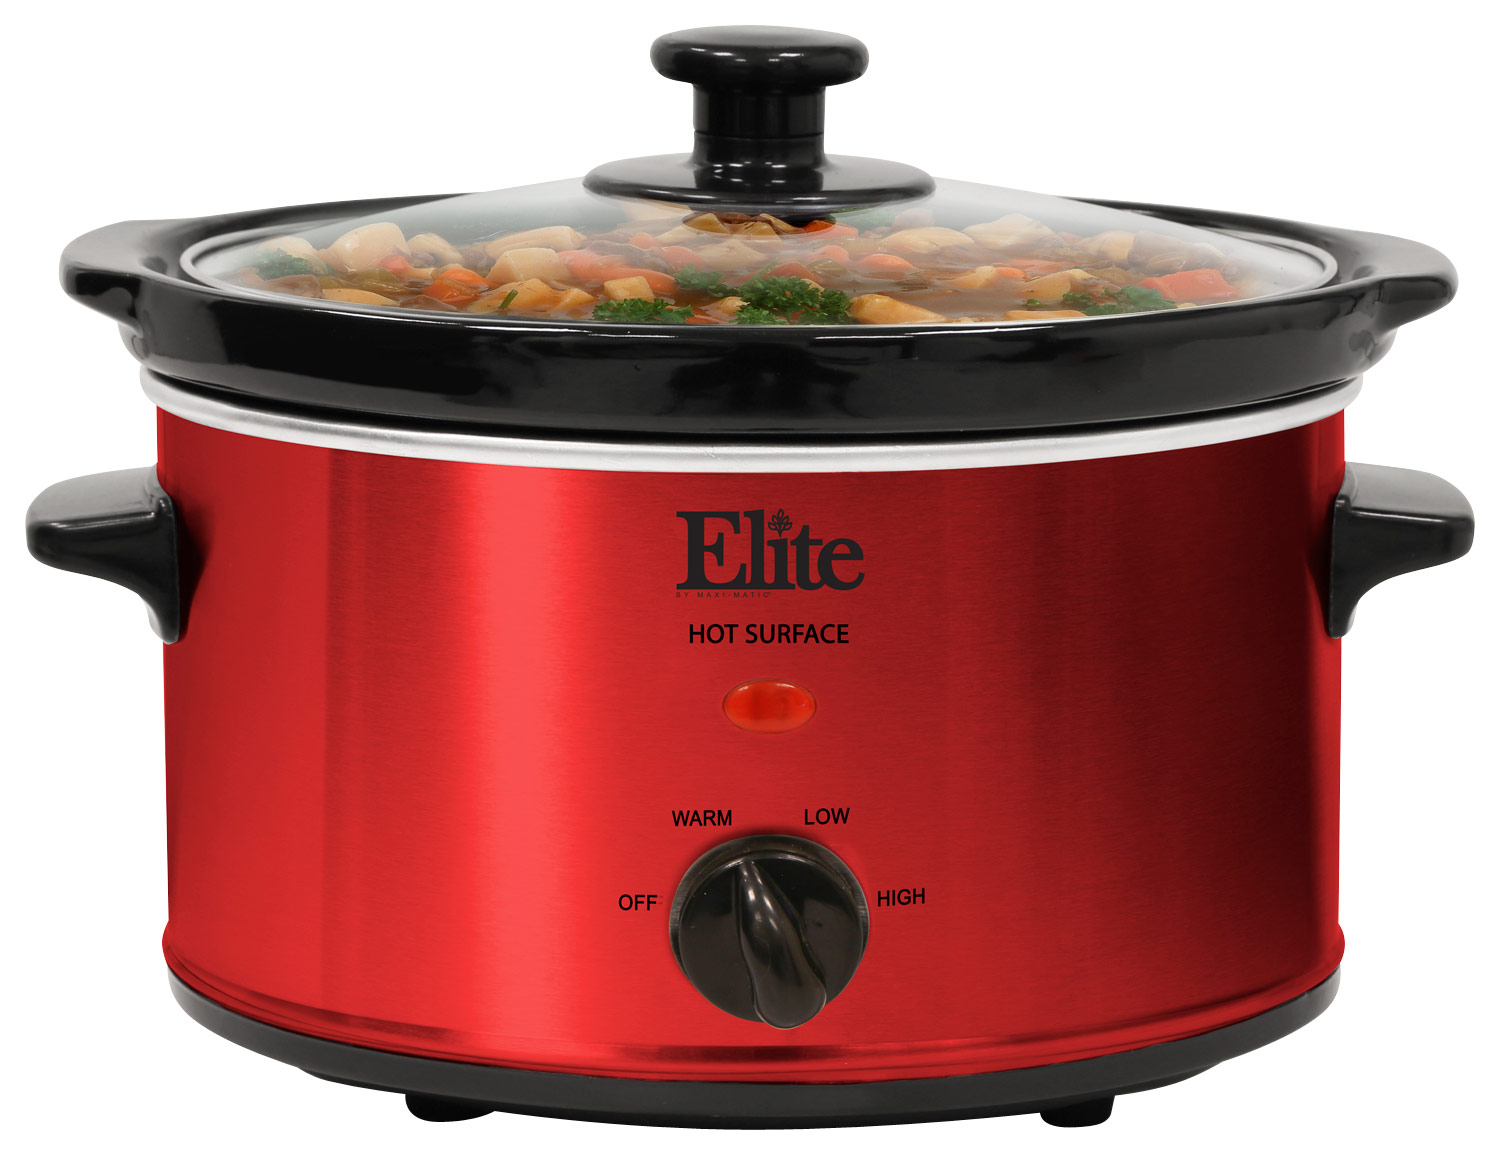 Elite - Gourmet 2-Quart Oval Slow Cooker - Red was $39.99 now $24.99 (38.0% off)